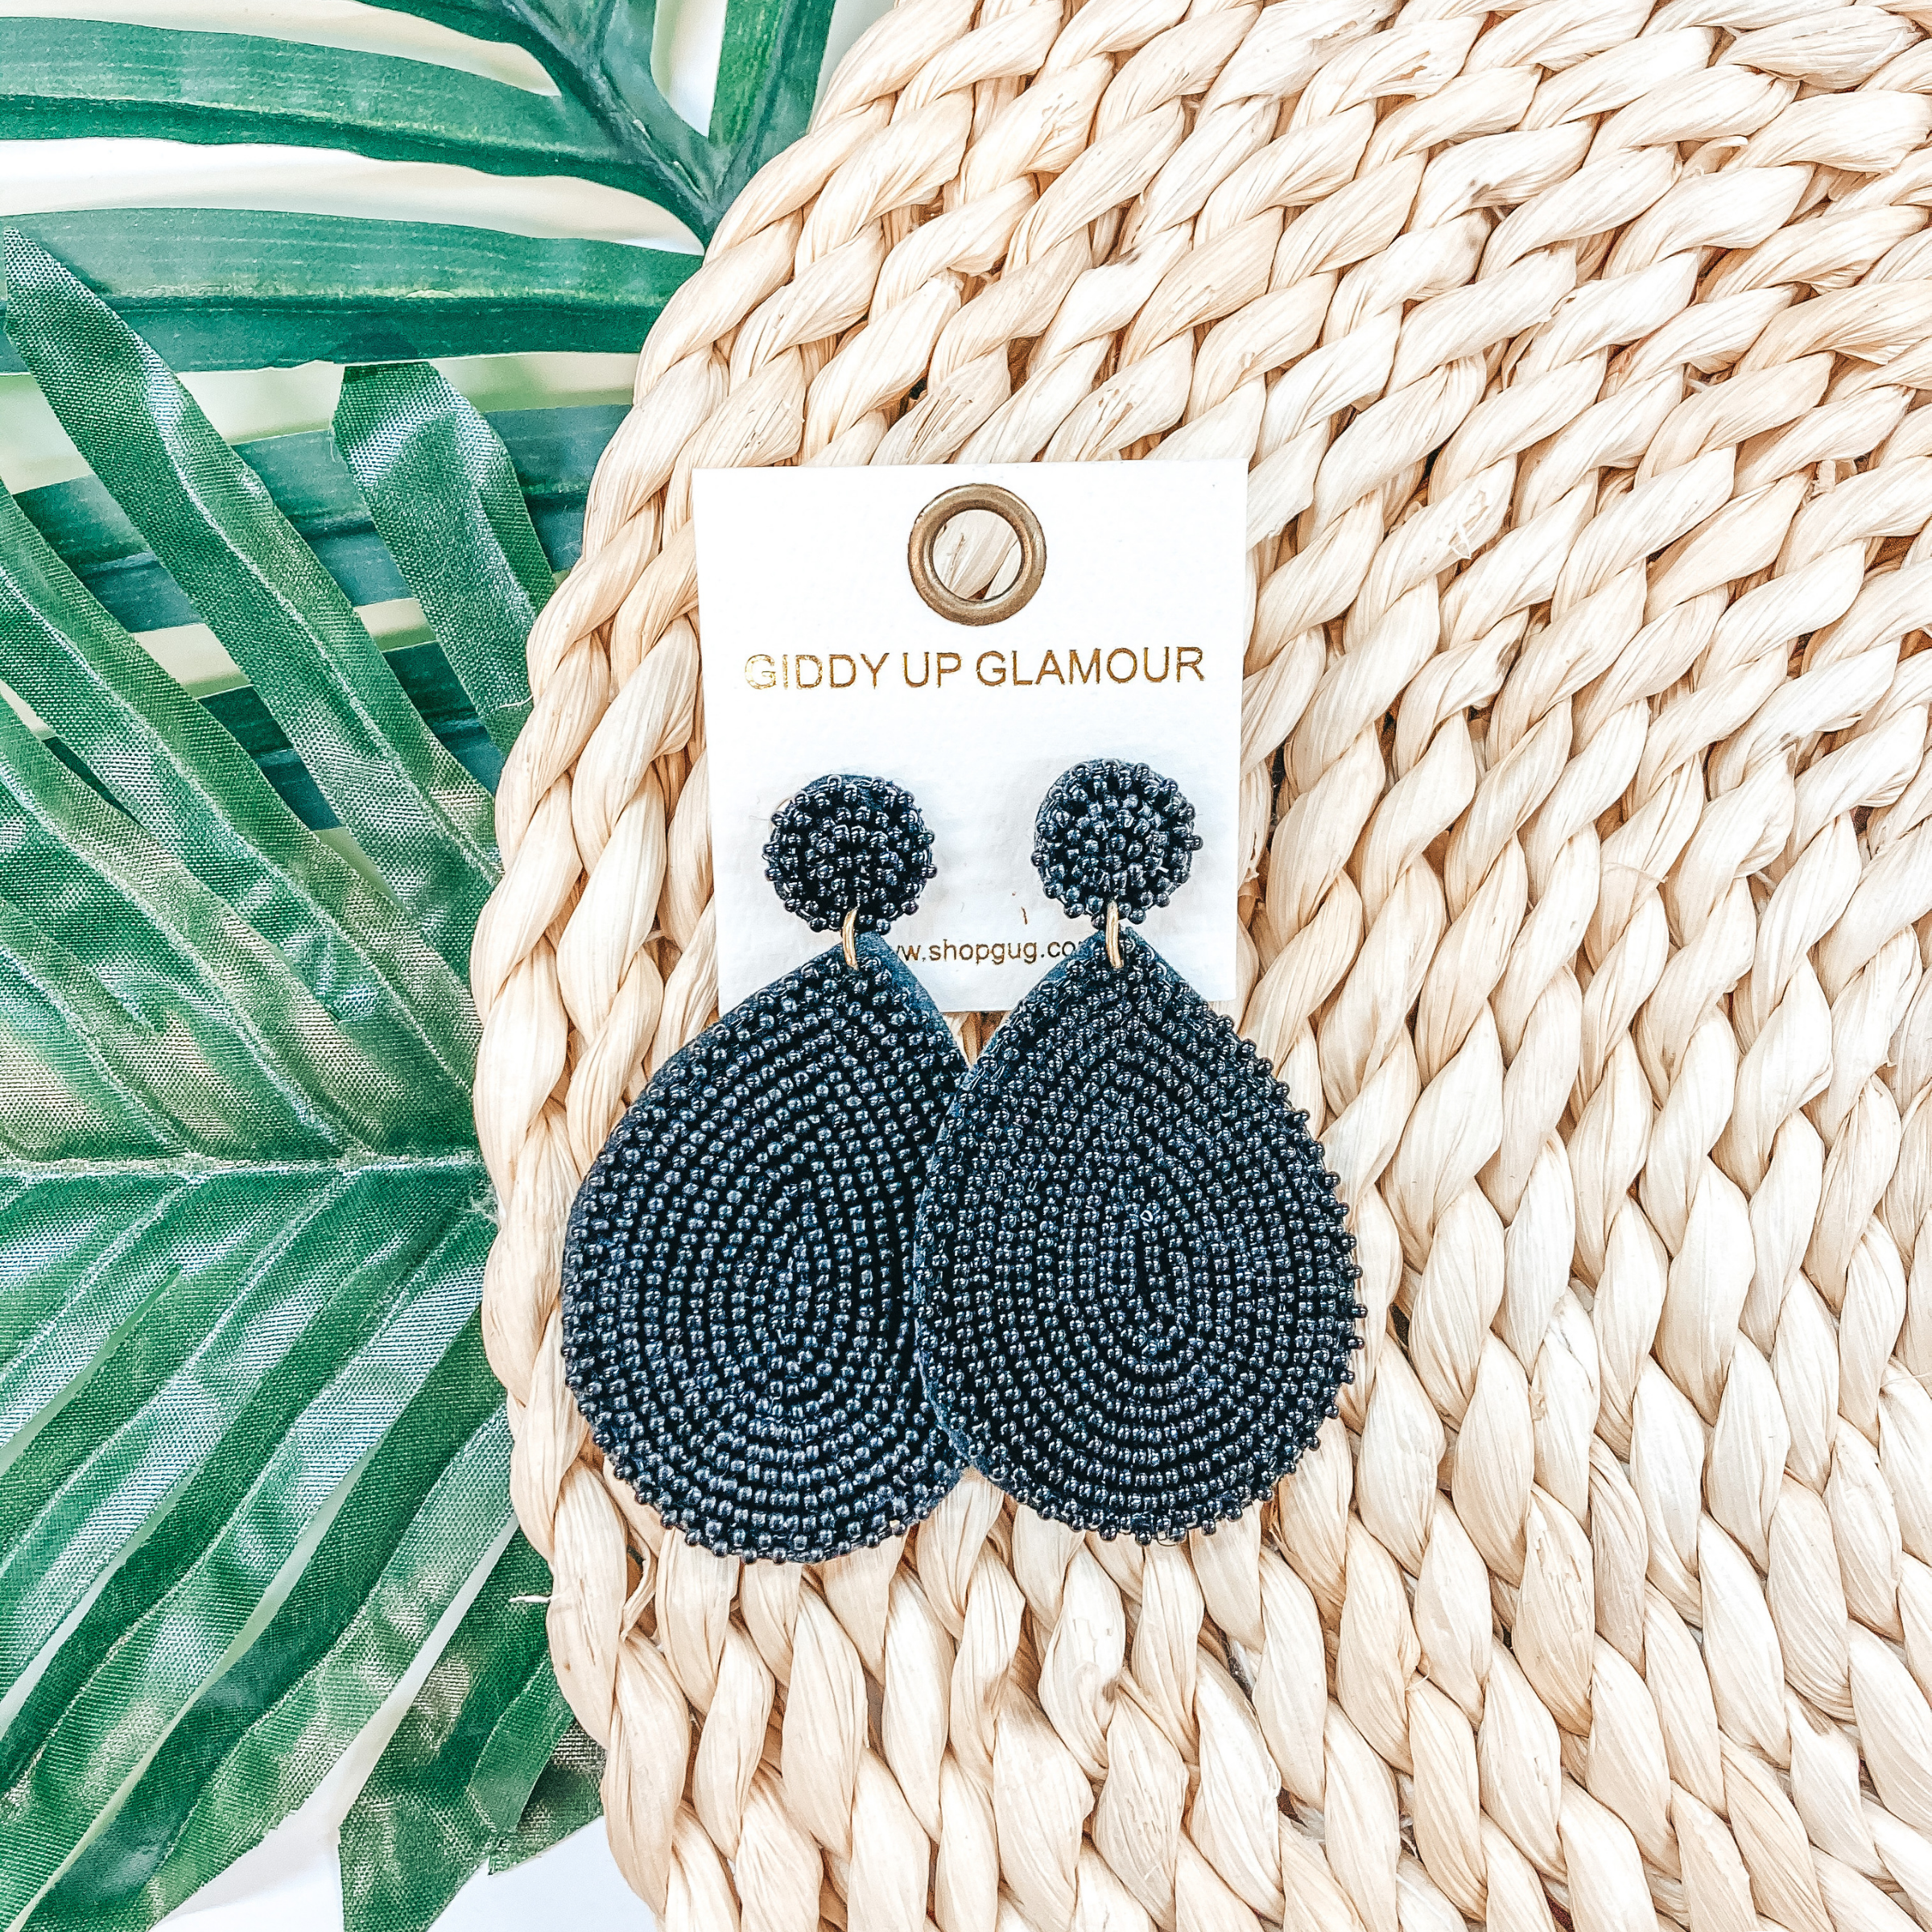 Circle, beaded post back stud earrings with a hanging, teardrop beaded pendant in black. These earrings are pictured on a tan basket weave with a green leaf in the background.